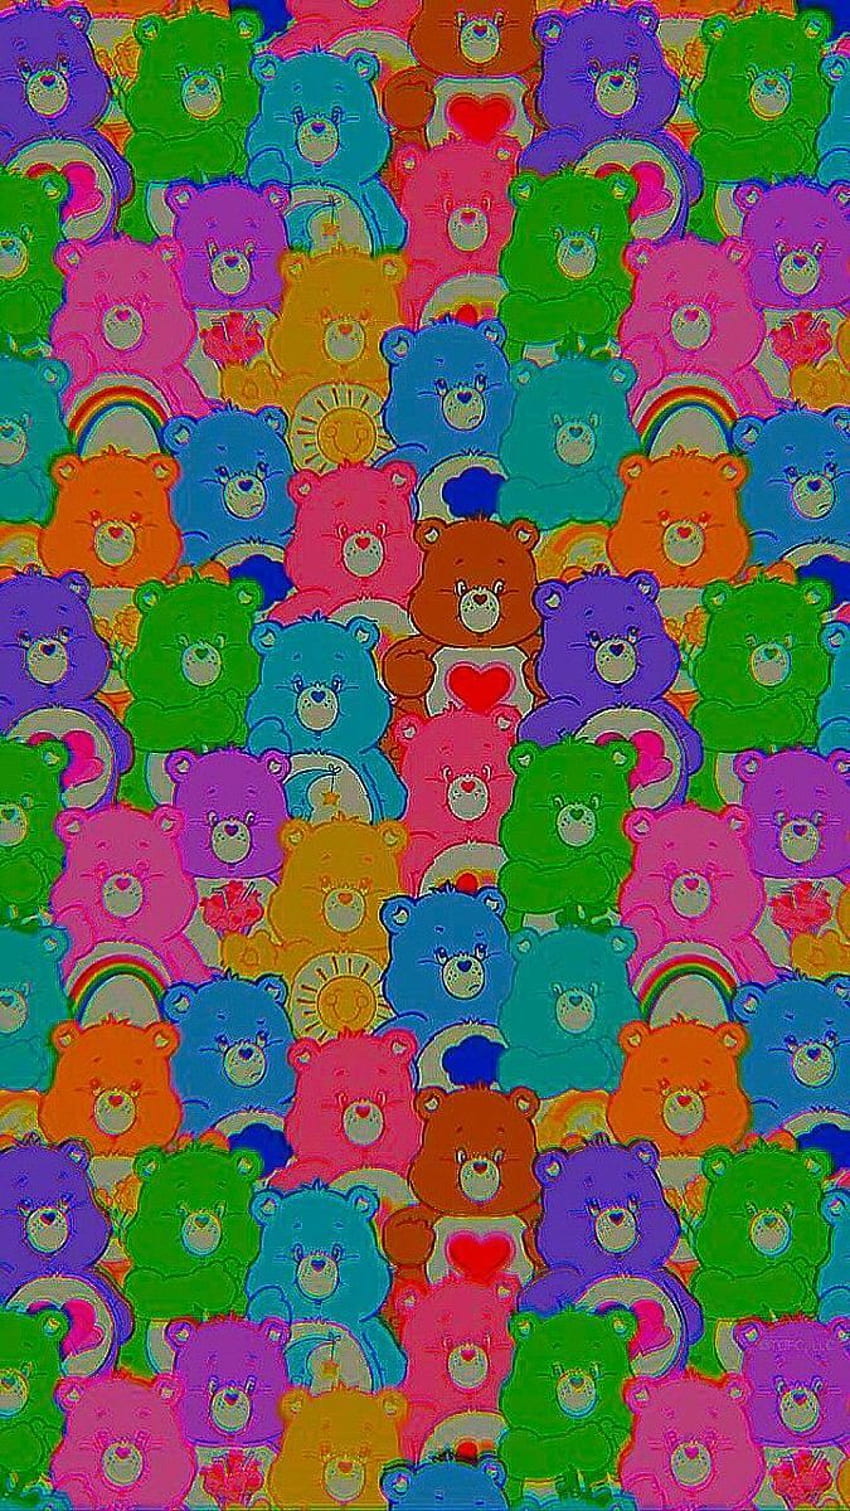 A colorful pattern of teddy bears - Kidcore